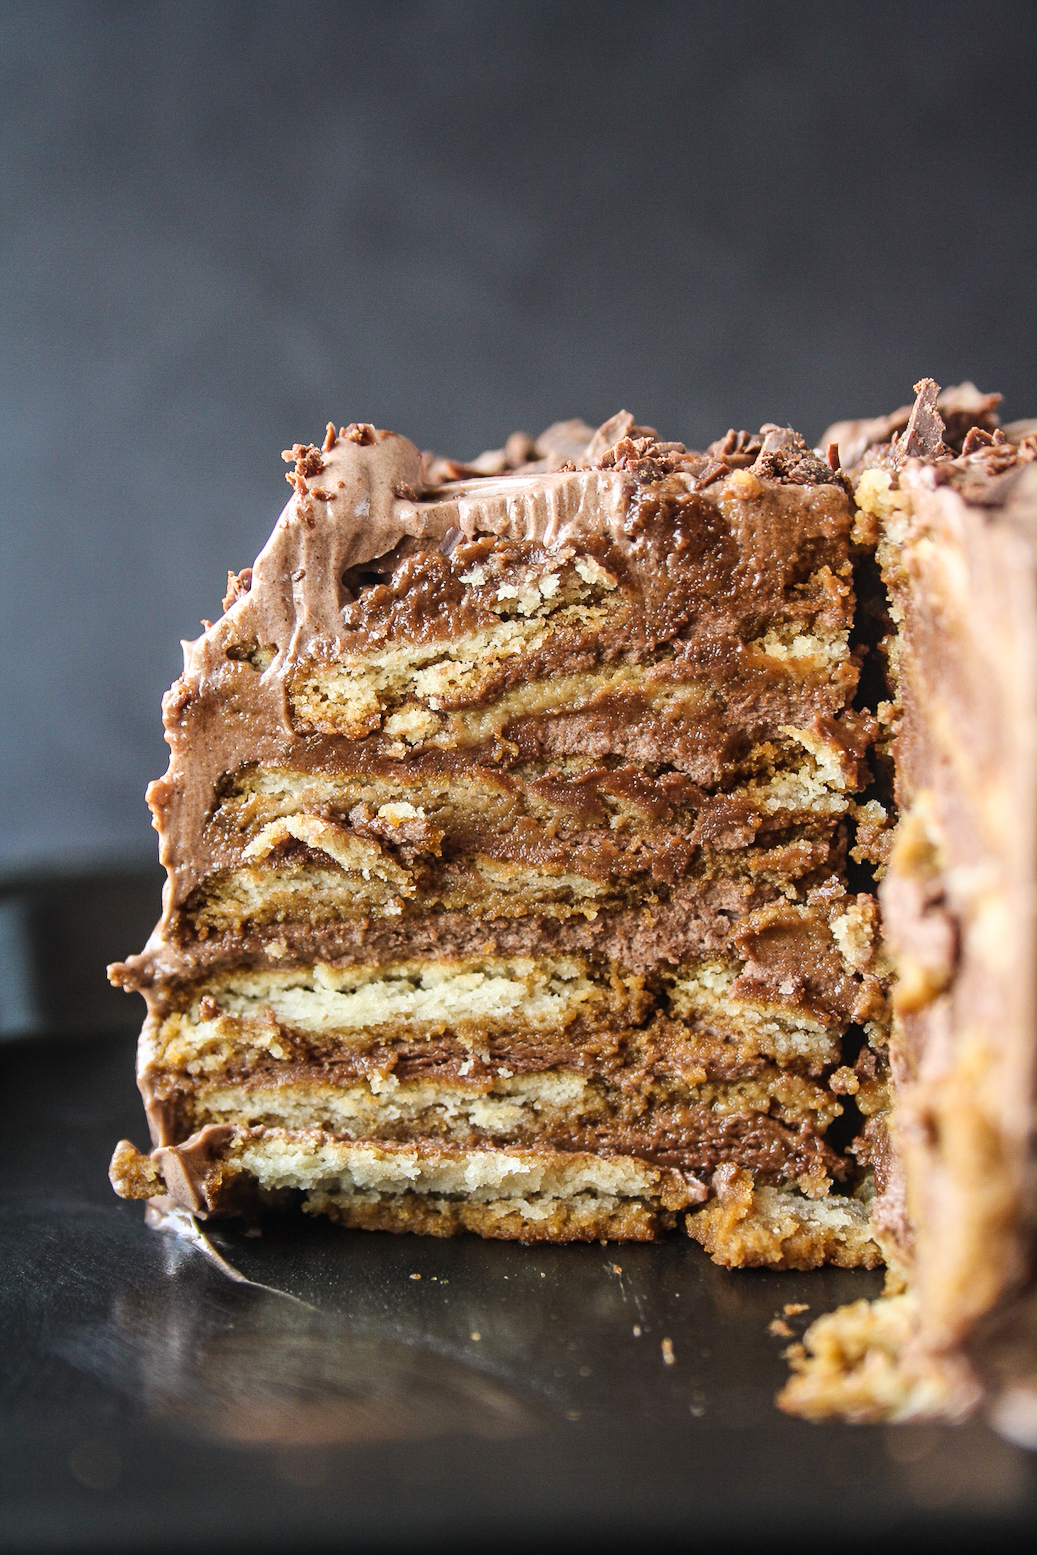 A decadent icebox cake with coffee-soaked glucose biscuits and silky chocolate frosting!